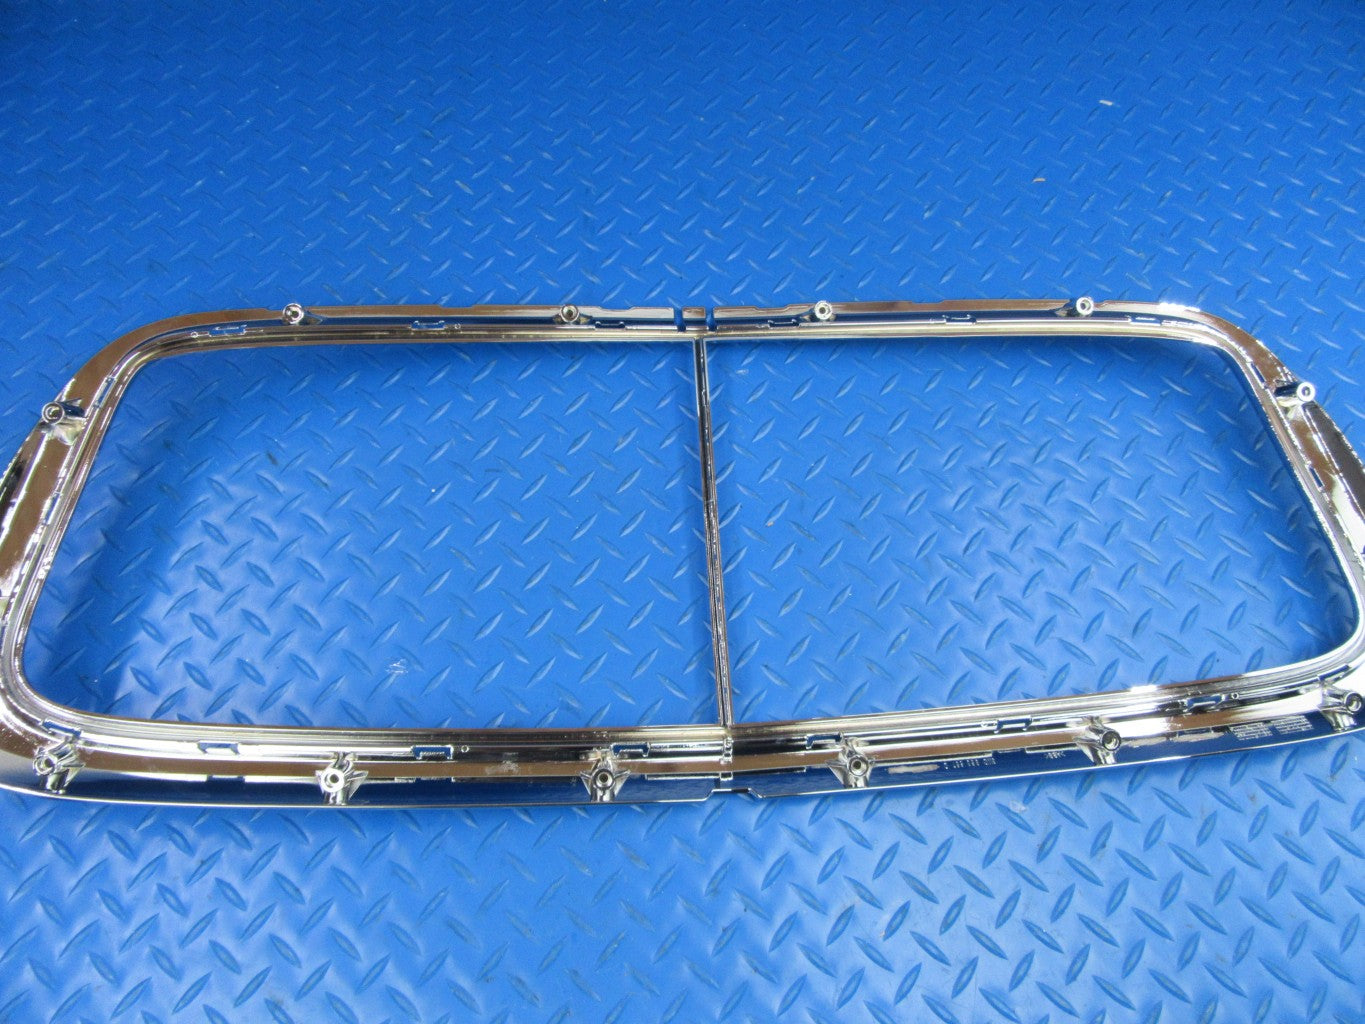 Bentley Continental Gt Gtc Flying Spur front radiator grille chrome trim #9195